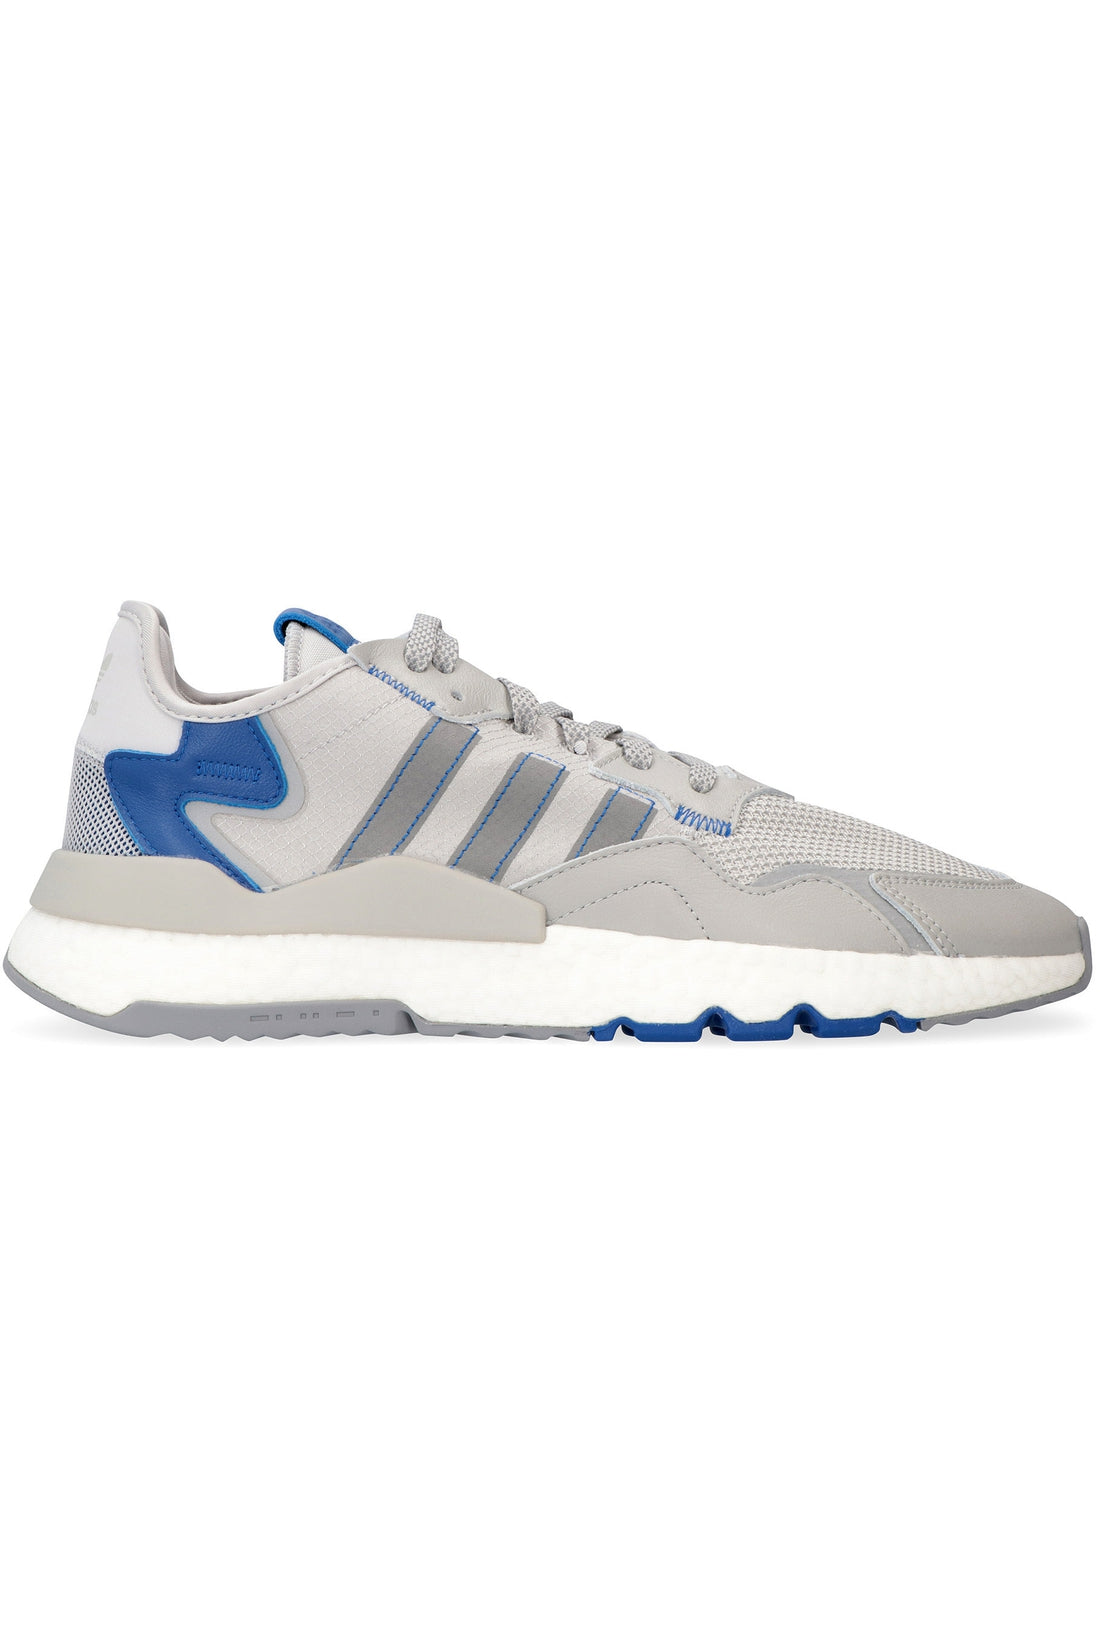 adidas-OUTLET-SALE-Nite Jogger low-top sneakers-ARCHIVIST